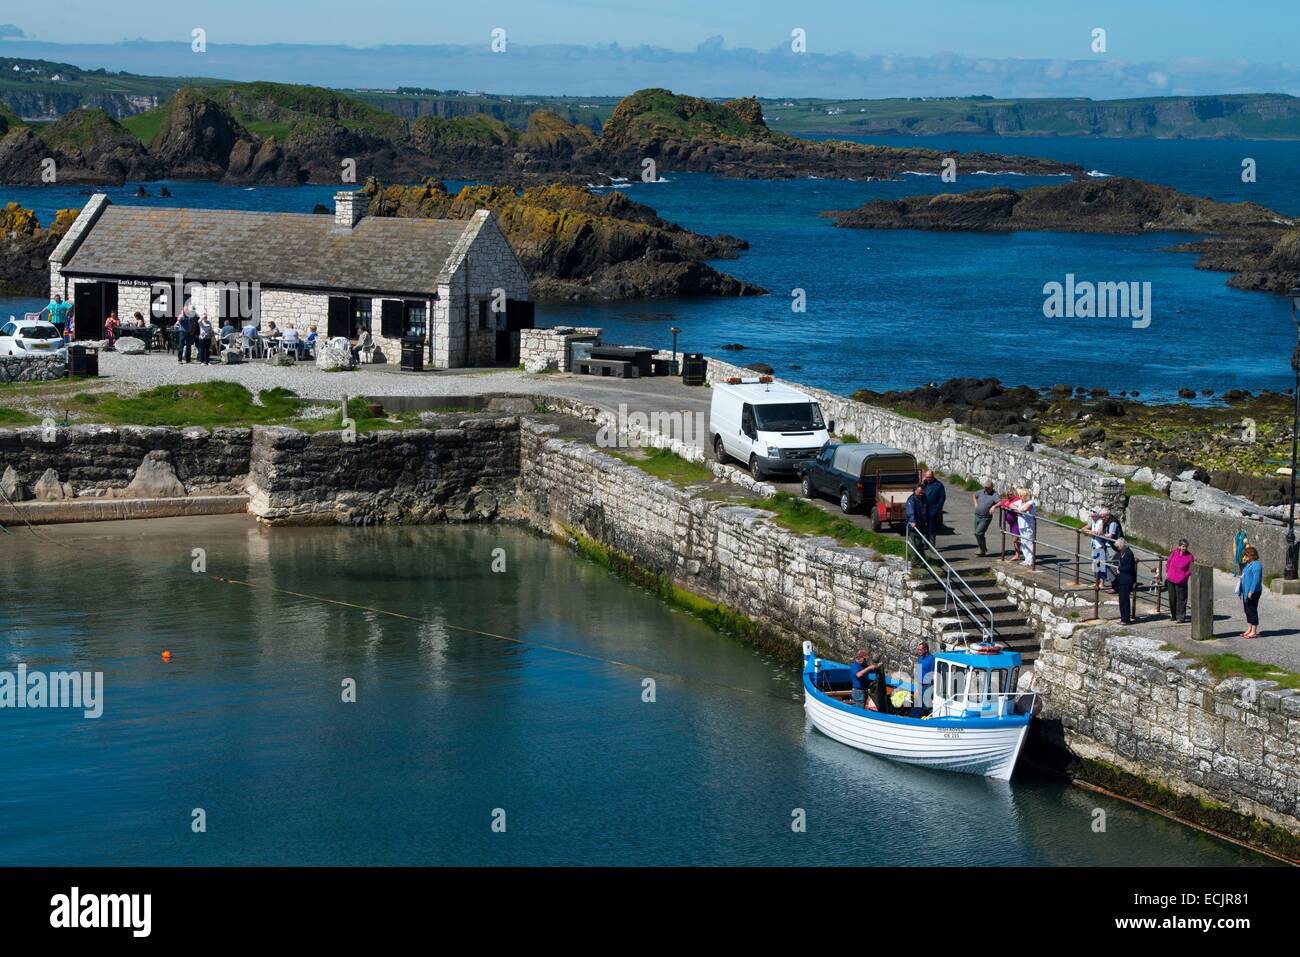 United Kingdom, Northern Ireland, County Antrim, Ballintoy, it's the bleak and blustery homeland of the Greyjoys, when Theon first returned to his birthplace, he arrived at Ballintoy Harbour, His baptism took place on the beach there Stock Photo